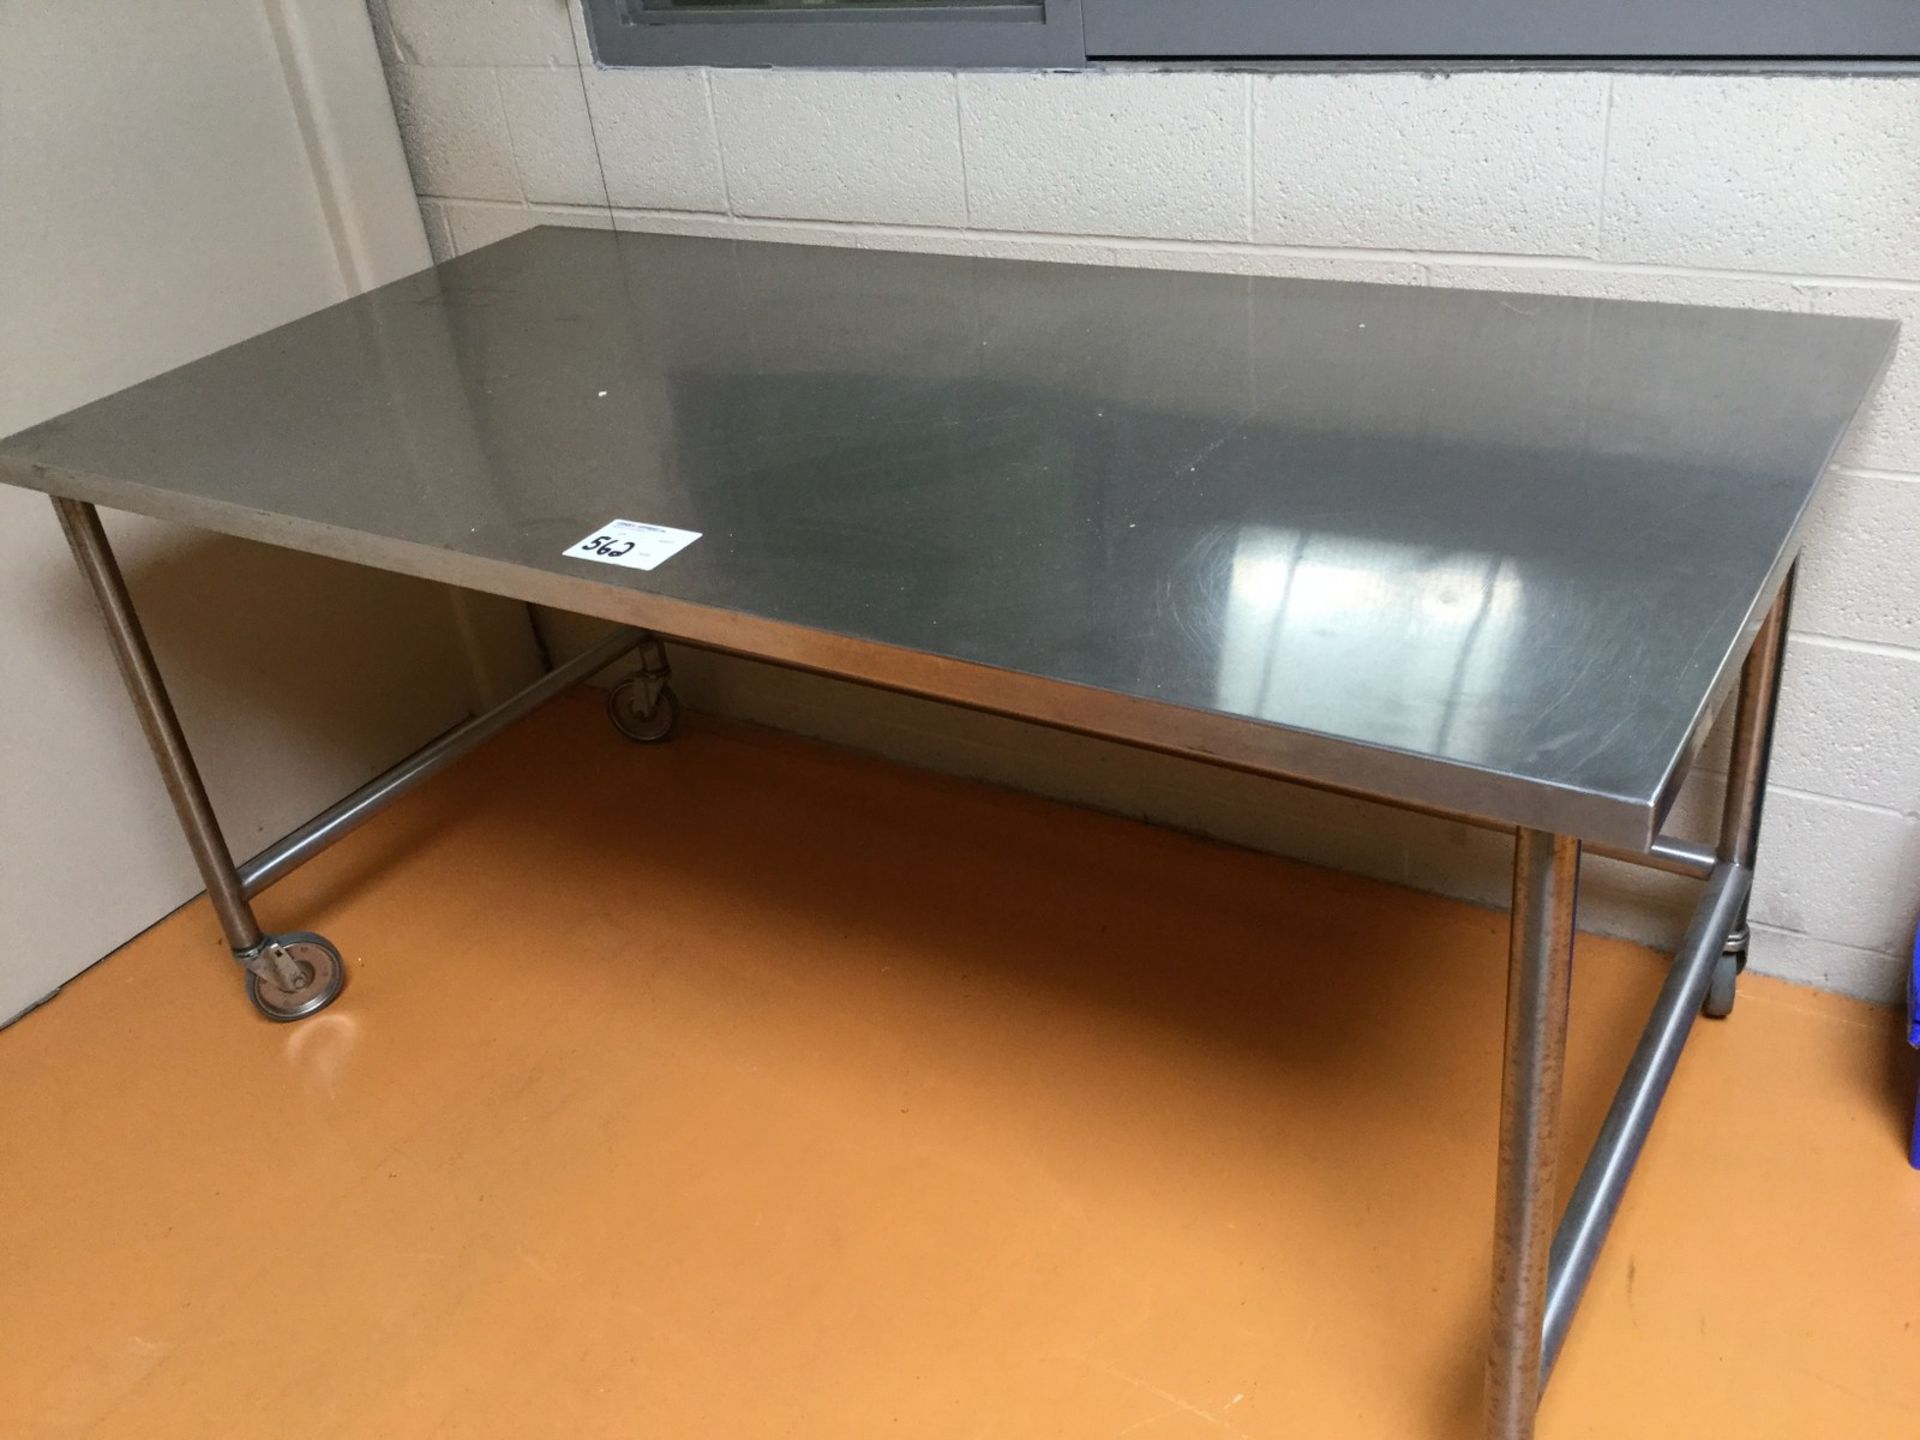 1 X STAINESS STEEL 5' X 3' TABLE W/ 360* CASTERS